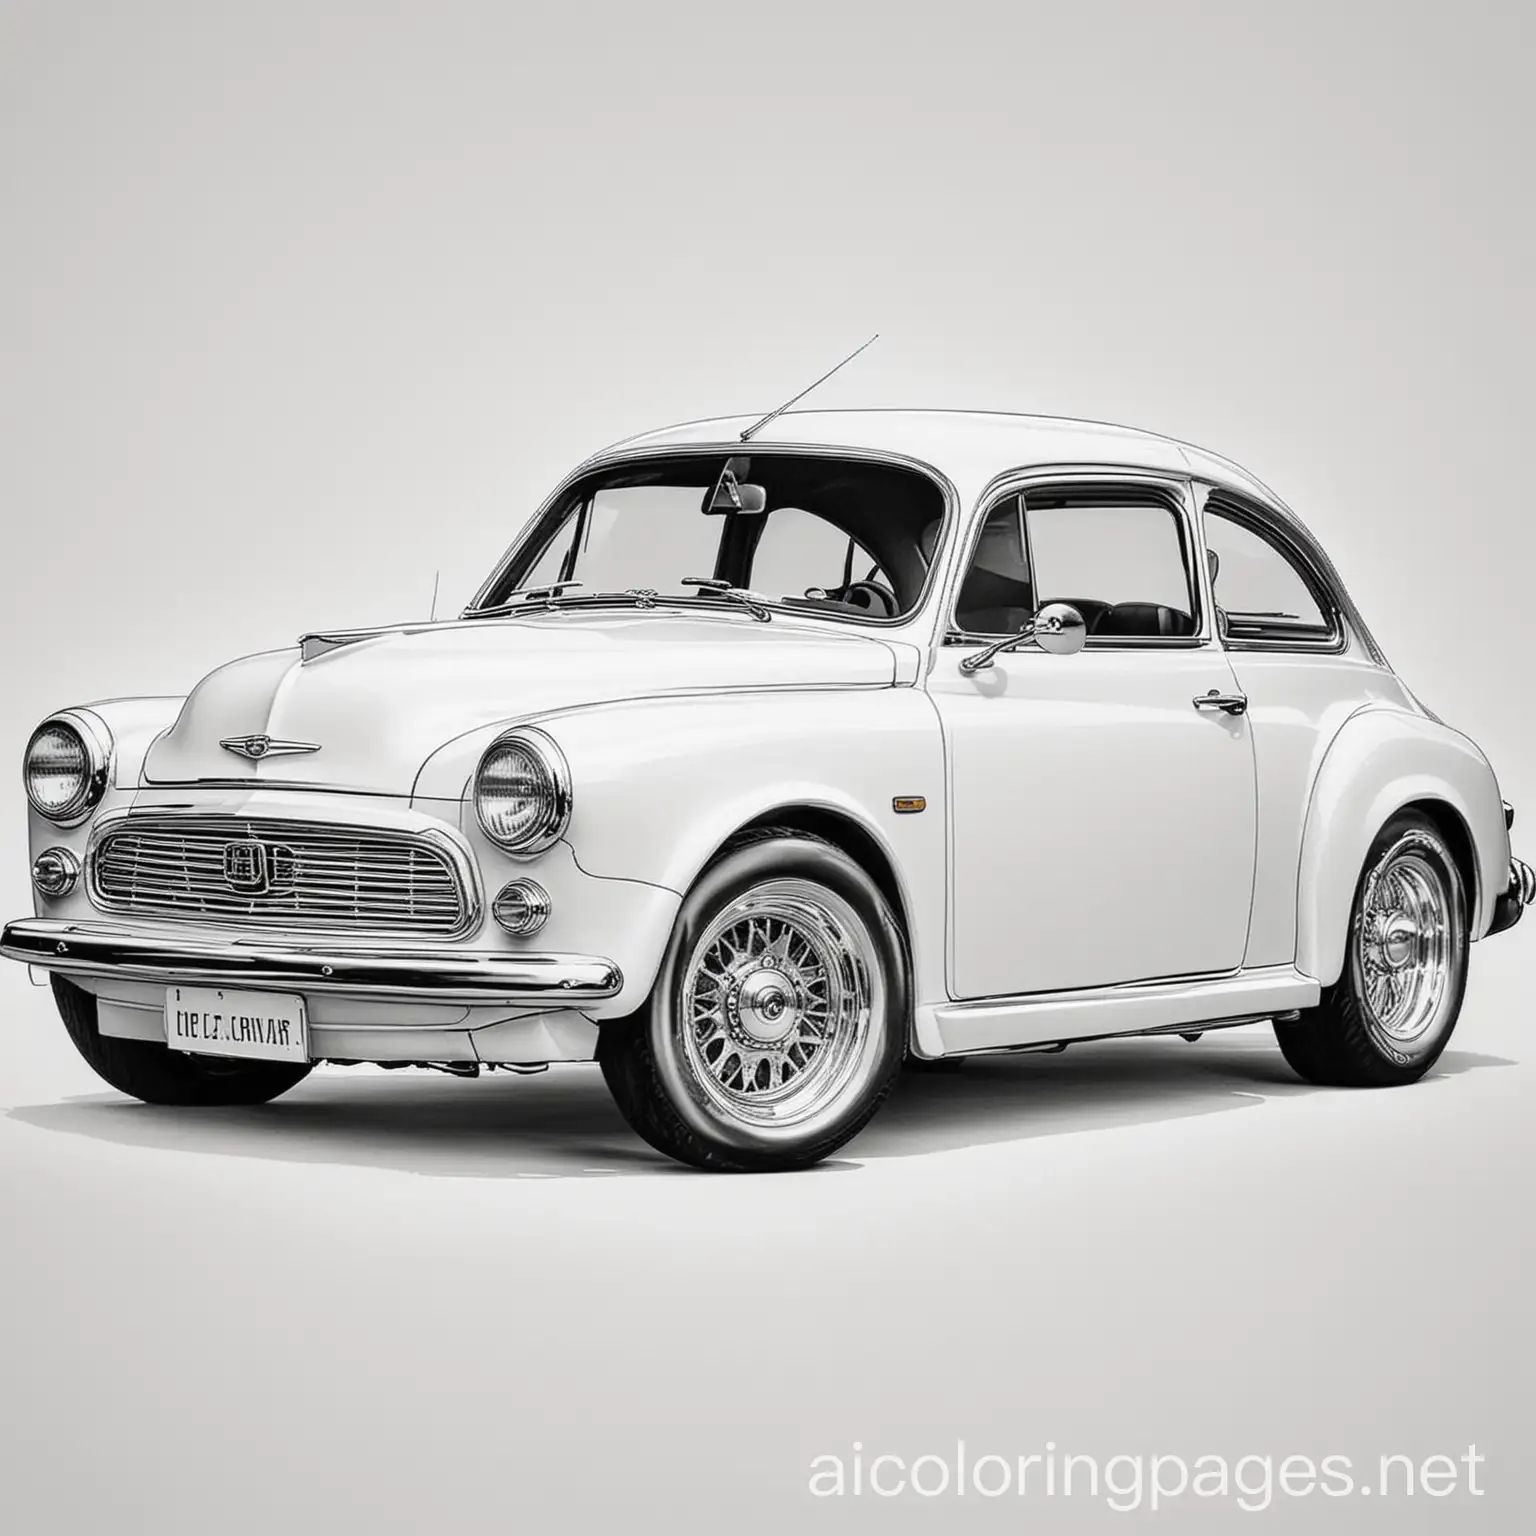 Classic-Car-Coloring-Page-Vintage-Vehicle-Sketch-on-White-Background